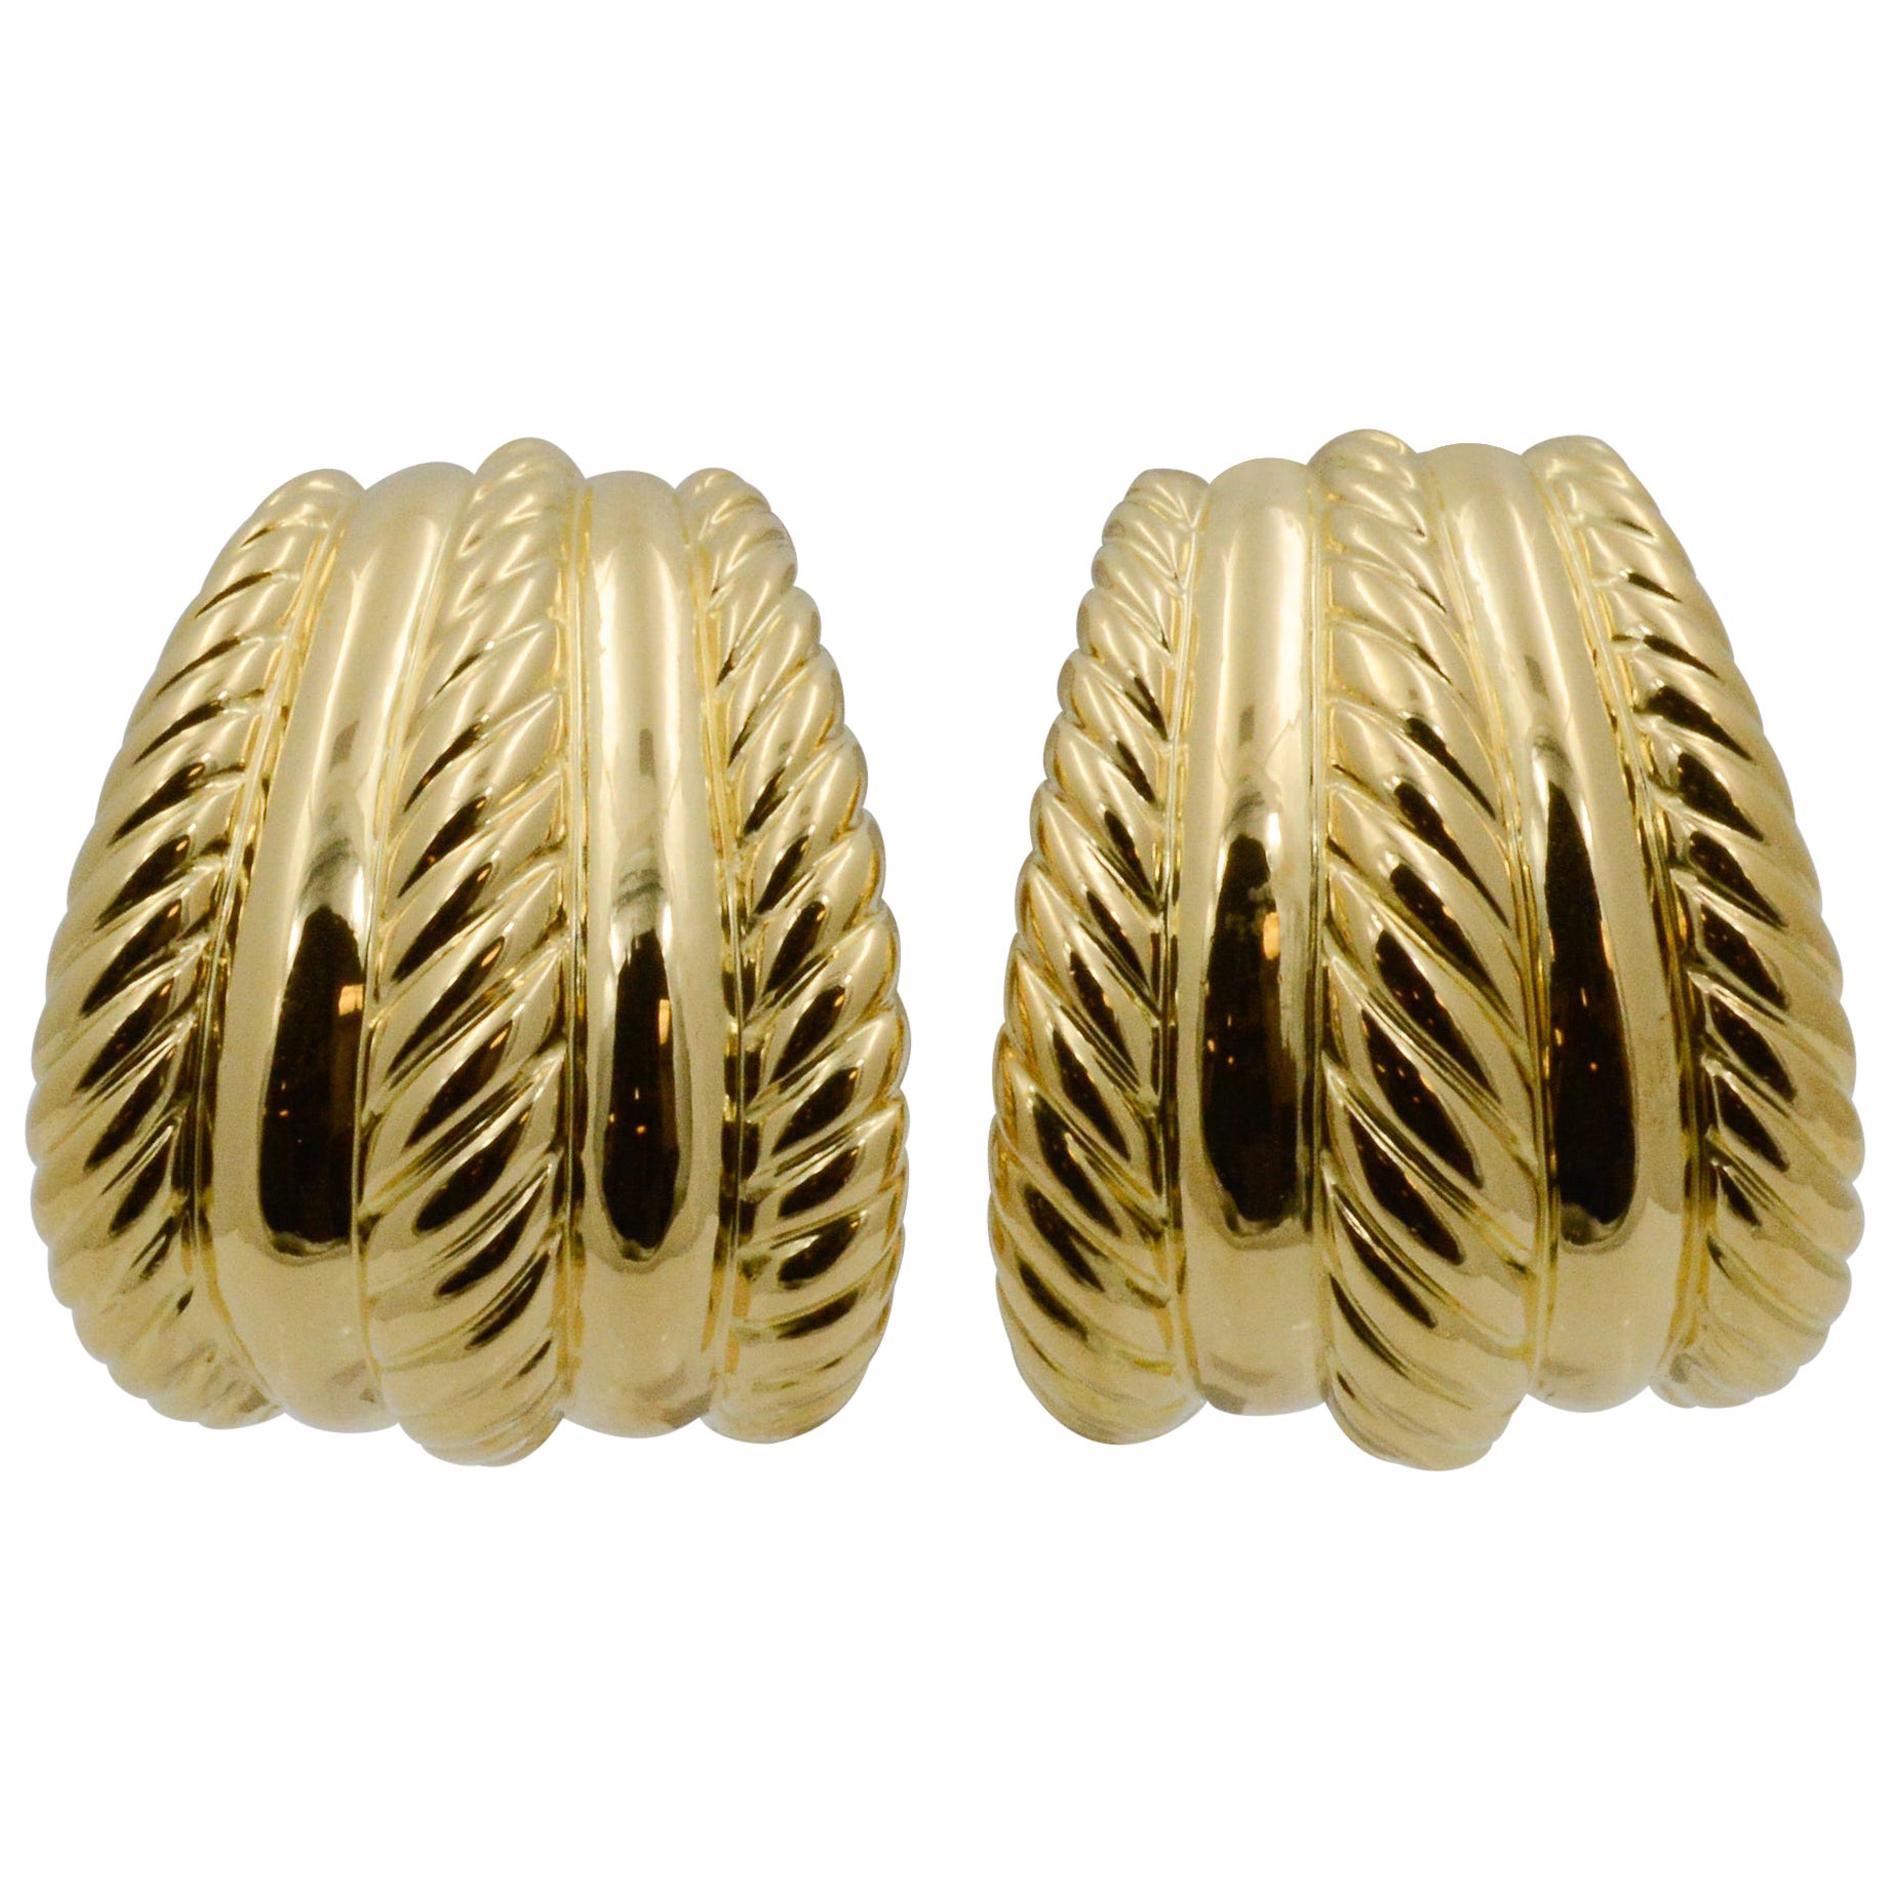 Exclusively from the Eiseman Estate Jewelry Collection, these 18k yellow gold Turi tapered half hoop earrings have four panels, two smooth, two with a rope swirl design. 